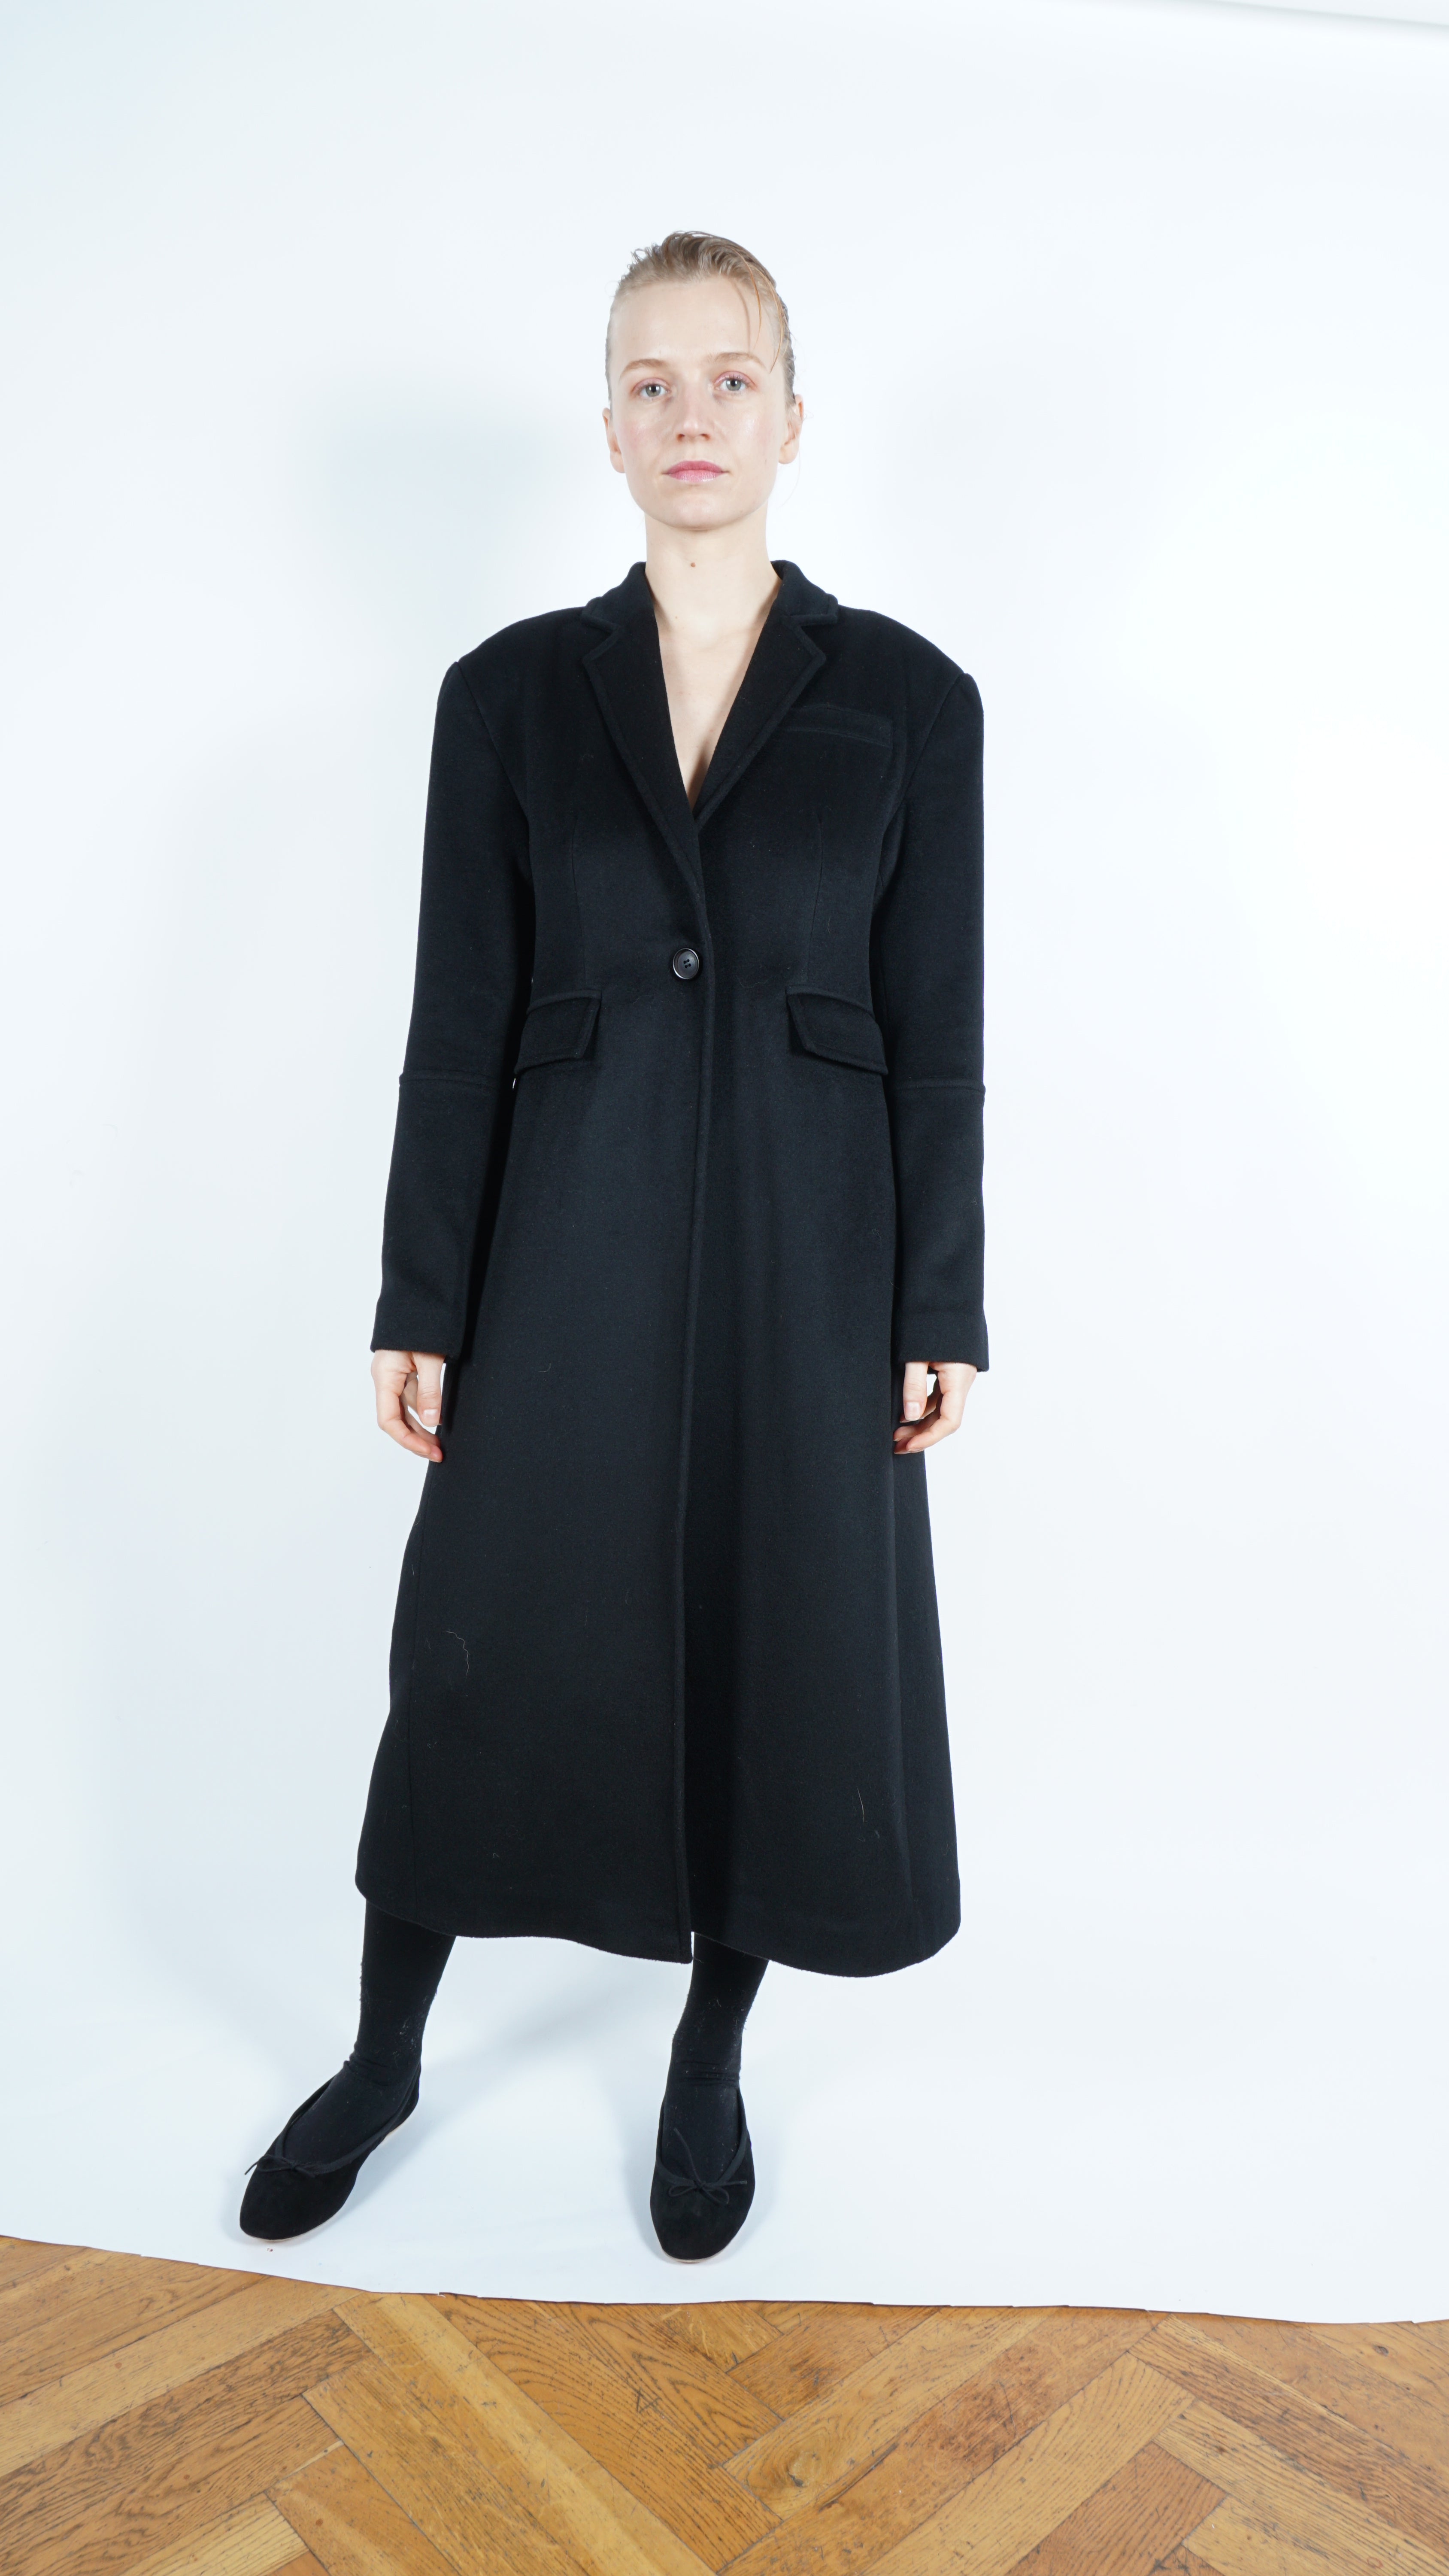 Coat by Mogall